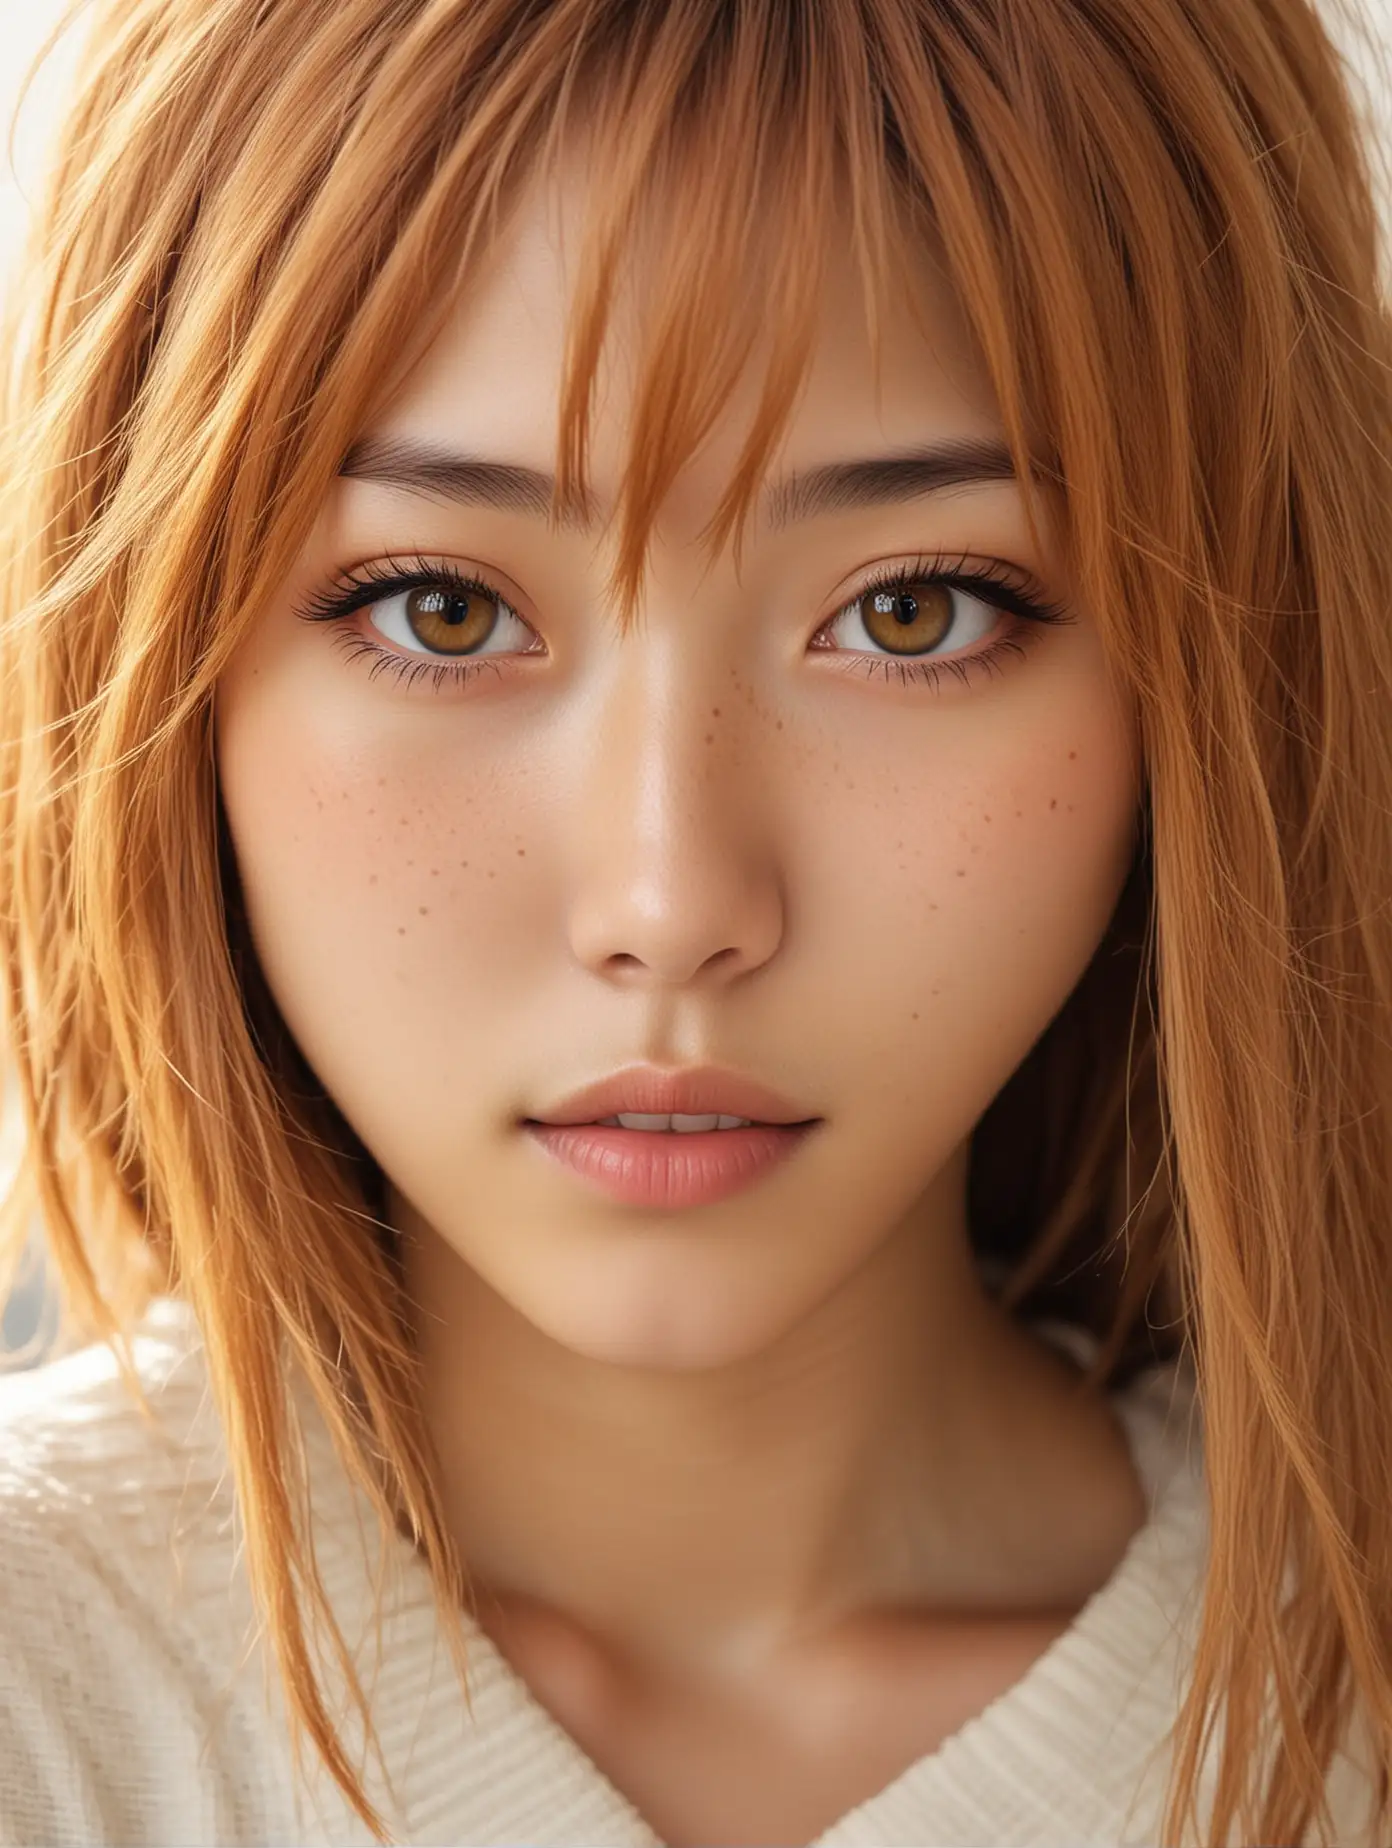 Japanese Girl with Freckles Amber Eyes and Caramel Hair